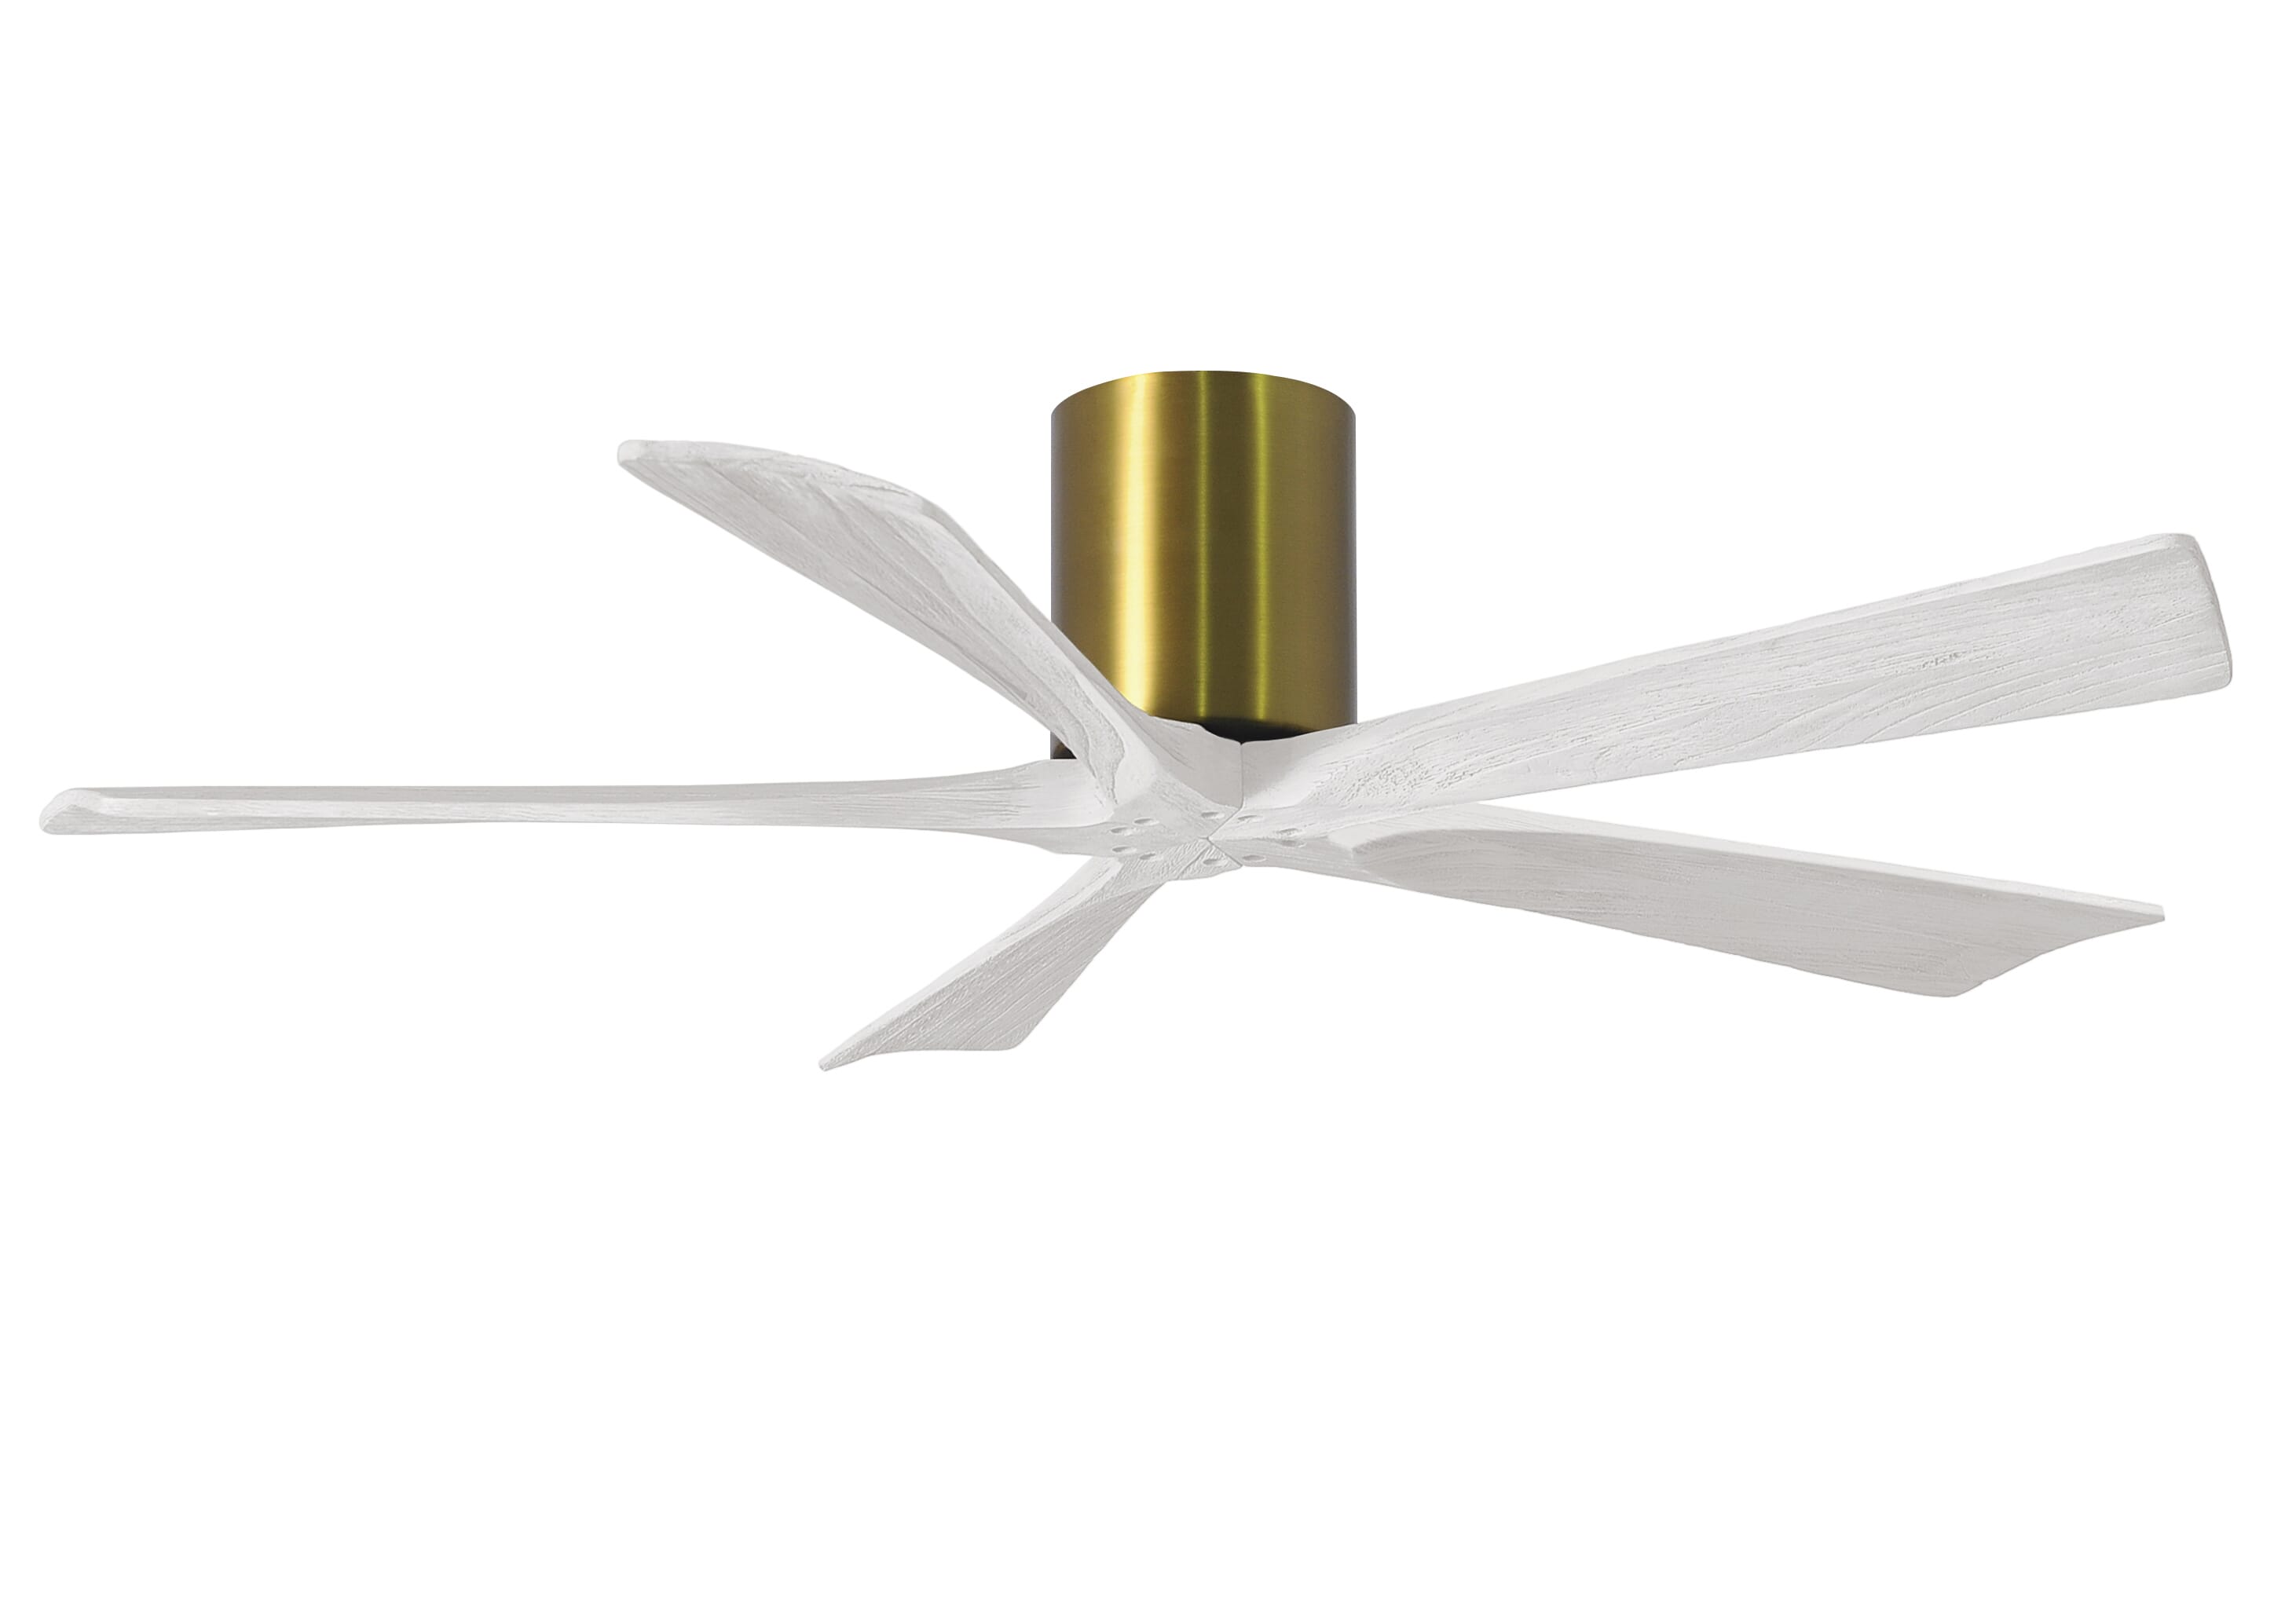 Irene 6-Speed DC 52"" Ceiling Fan in Brushed Brass with Matte White blades -  Matthews Fan Company, IR5H-BRBR-MWH-52